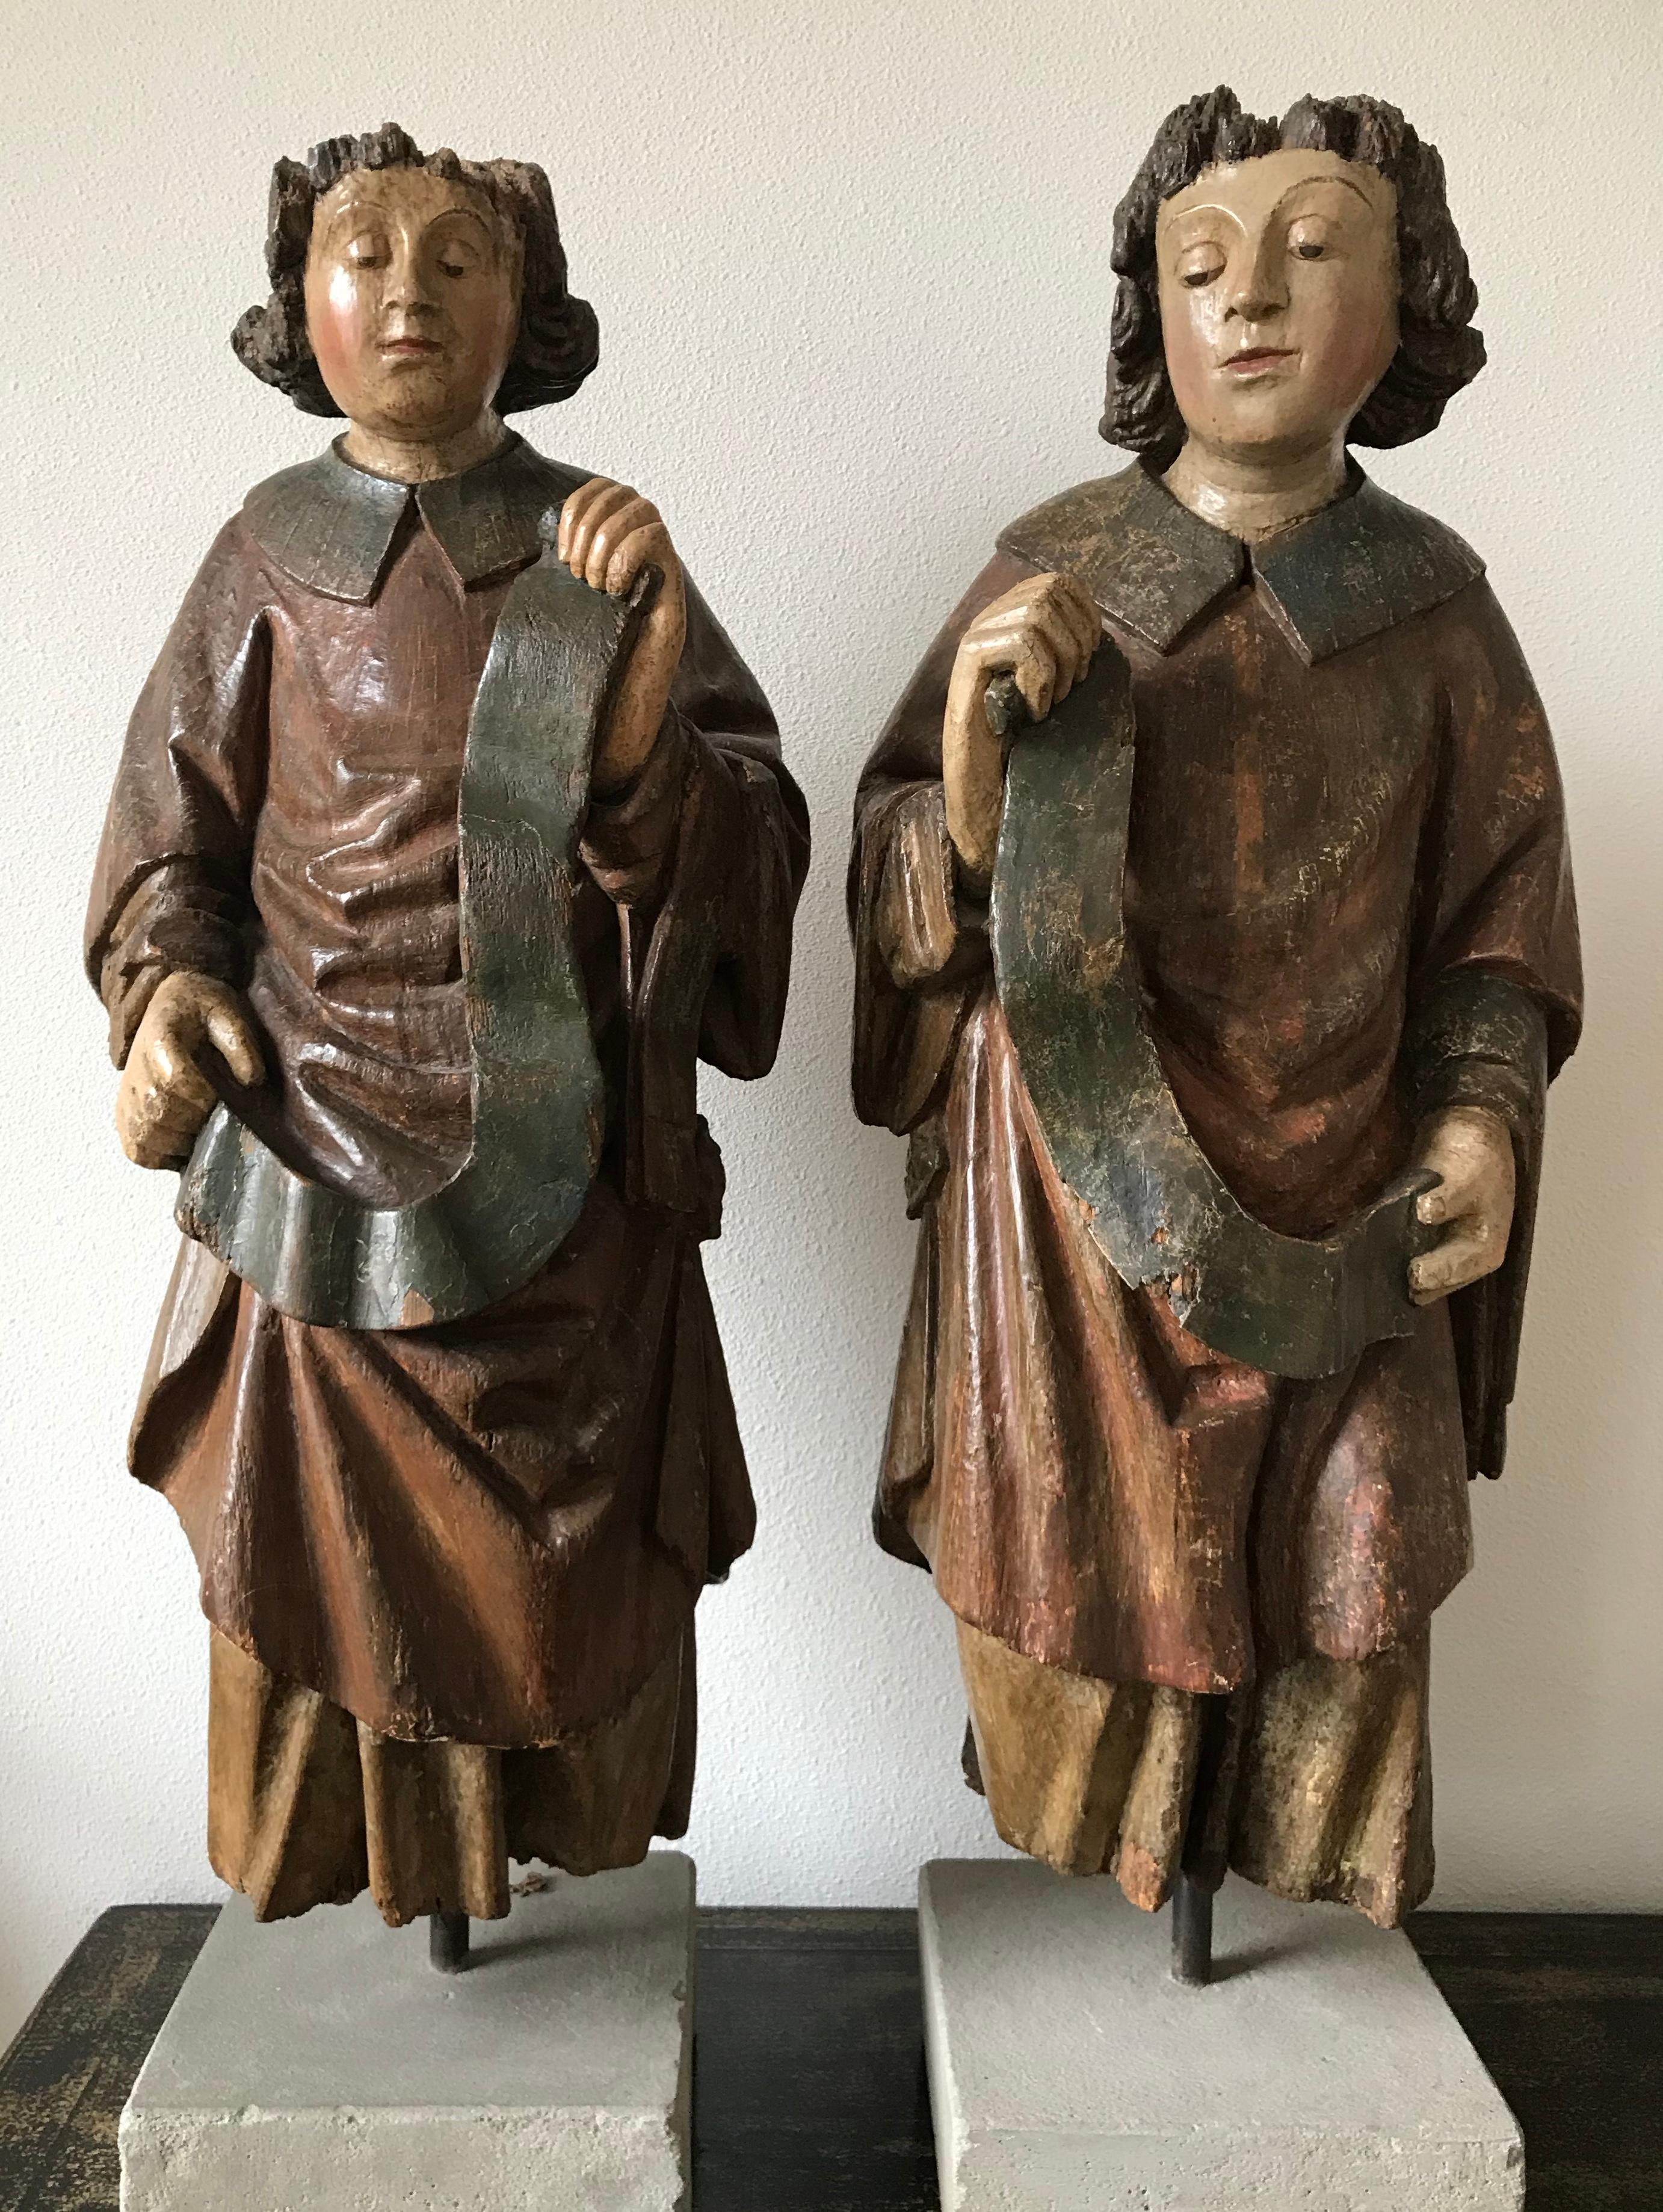 Flemish  pair of angles or messengers, with banderoles in their hands.
Wood carved in oak, polychromed.